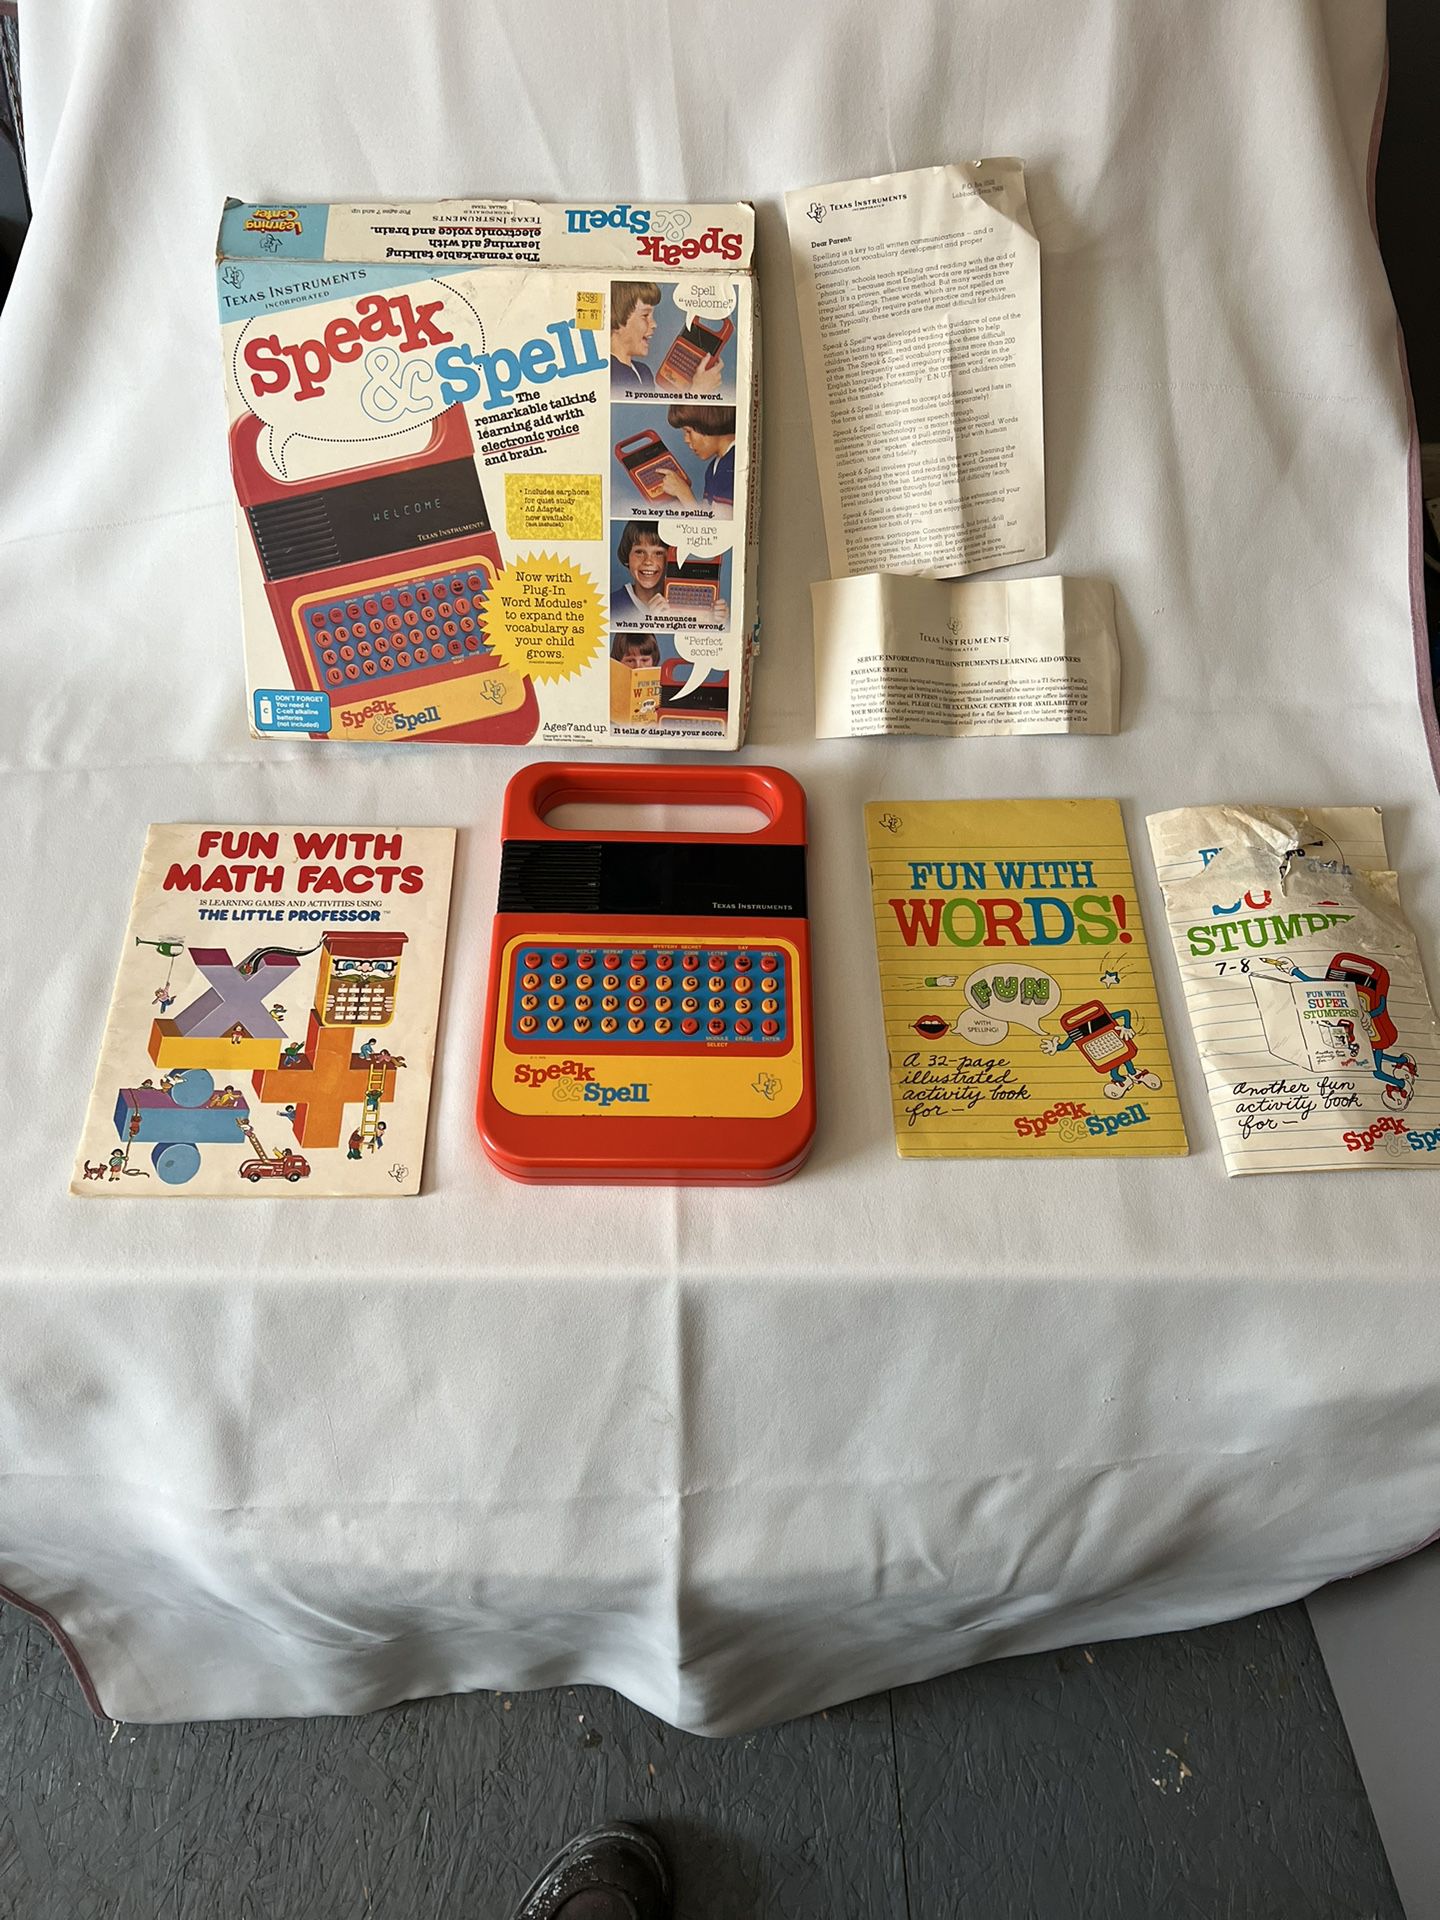 1980 Speak And Spell By Texas Instruments